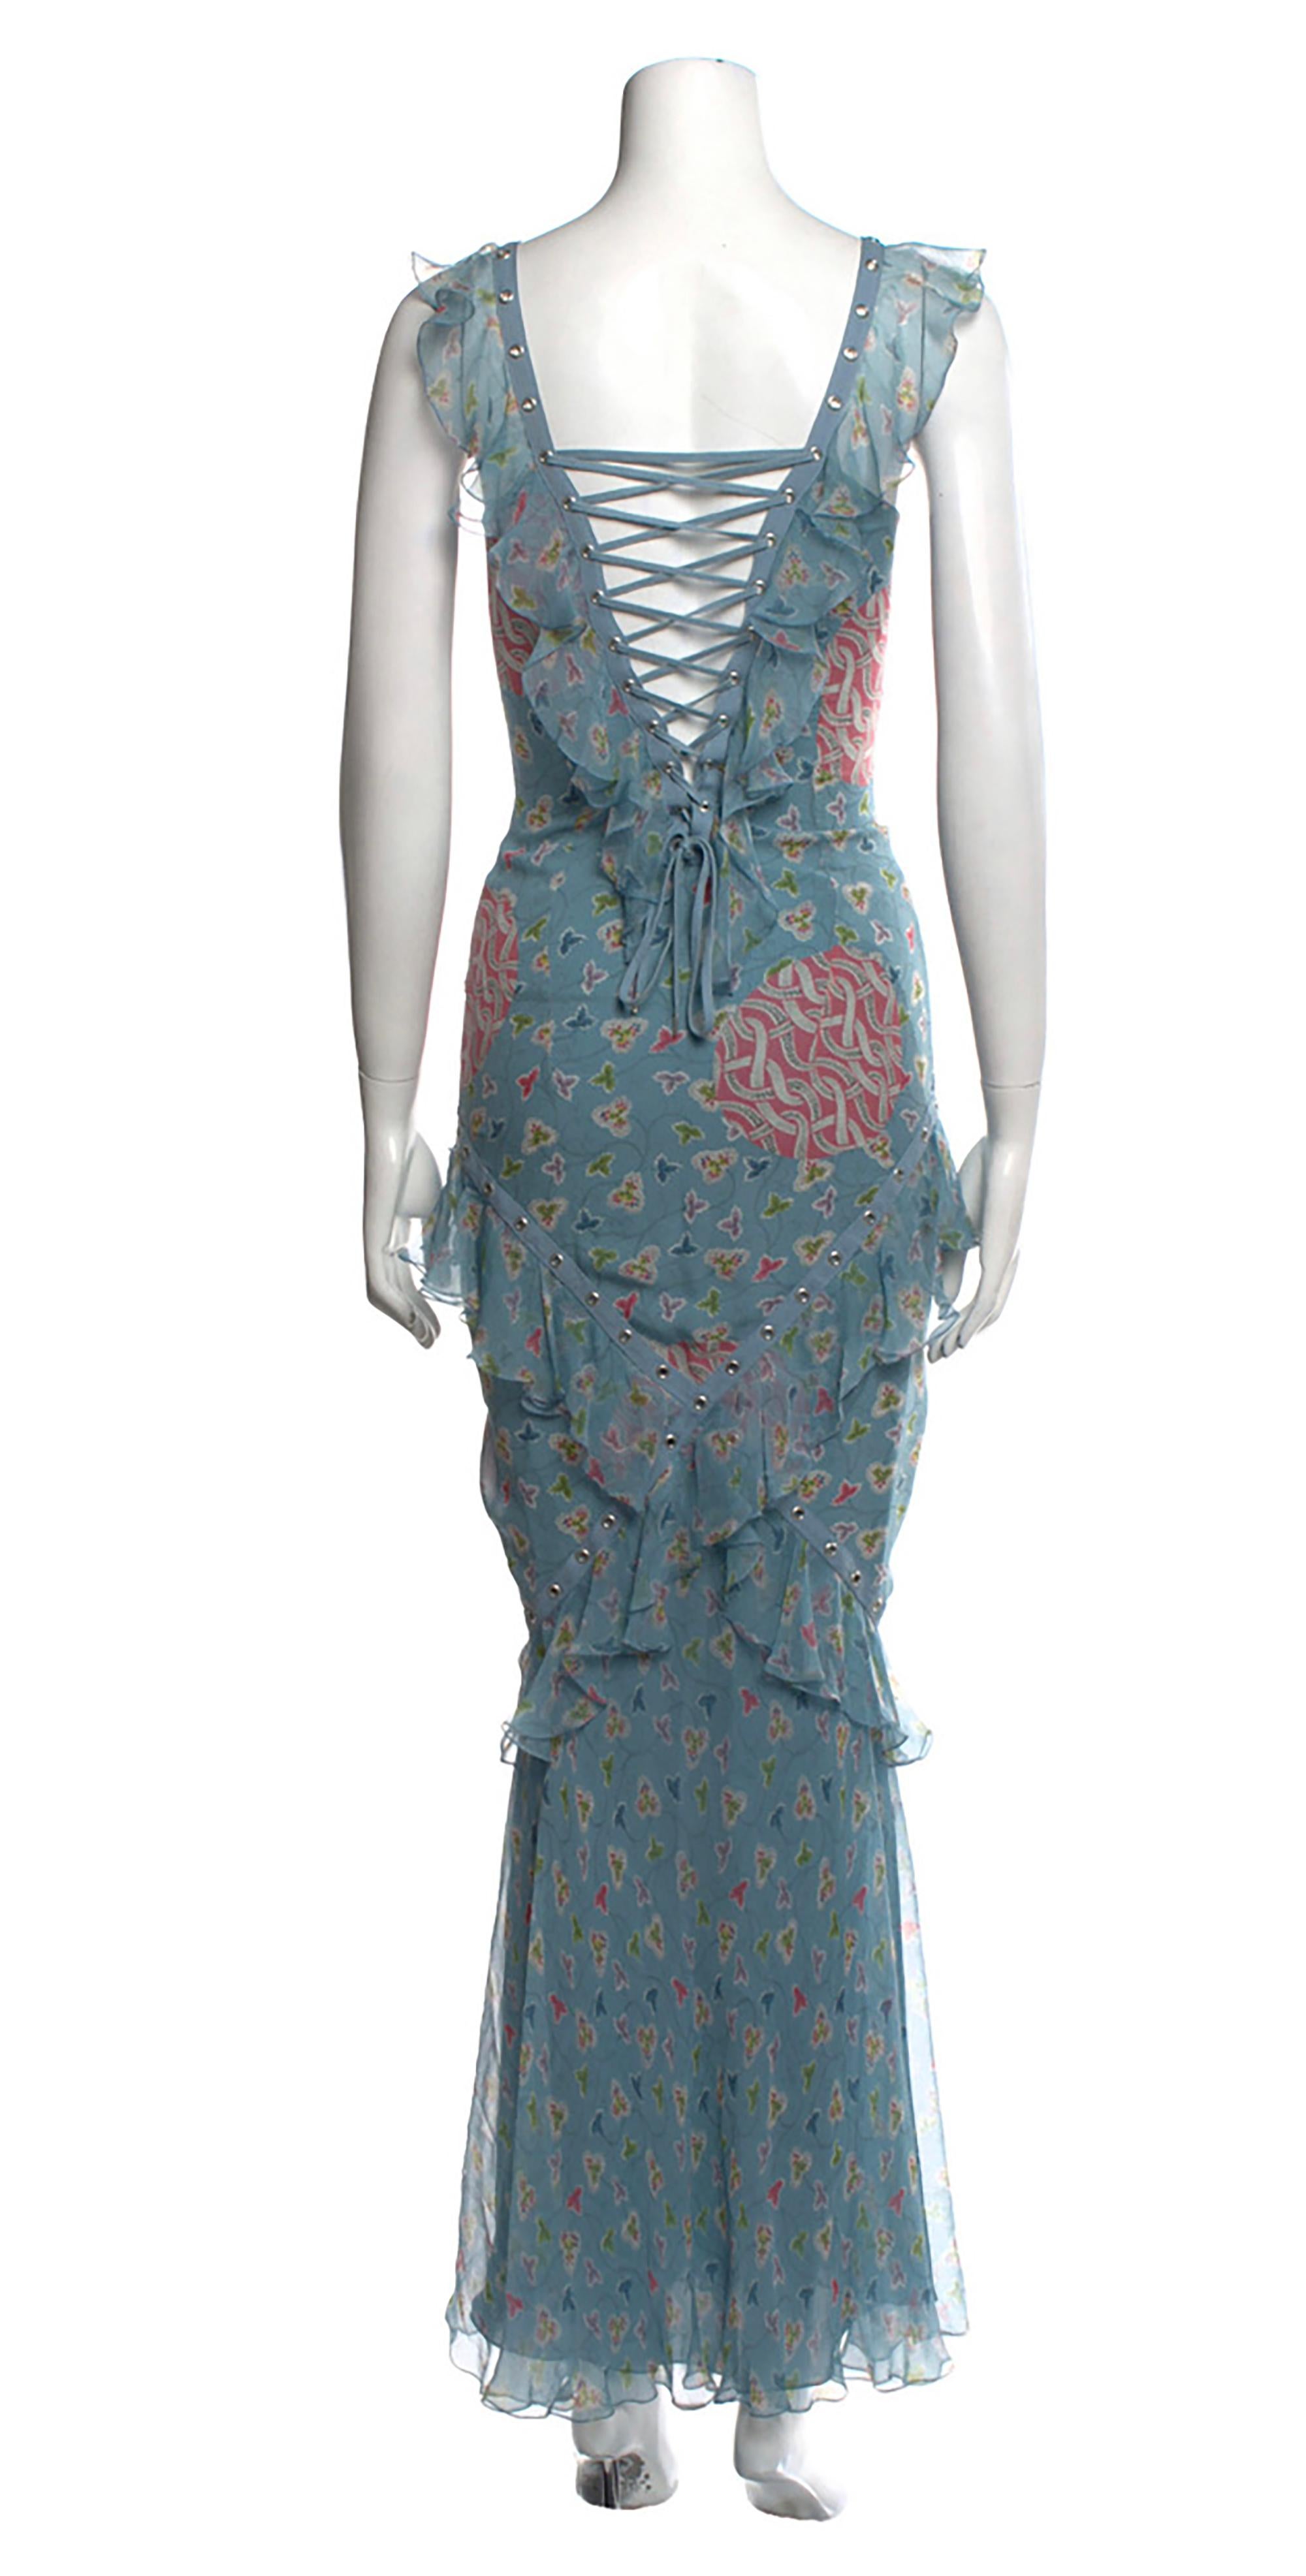 2003 S/S Christian Dior by Galliano Gown 
Floral pattern, lacing at front and back. 
100% silk 
Condition: Excellent
size S / US 4 / FR 36
